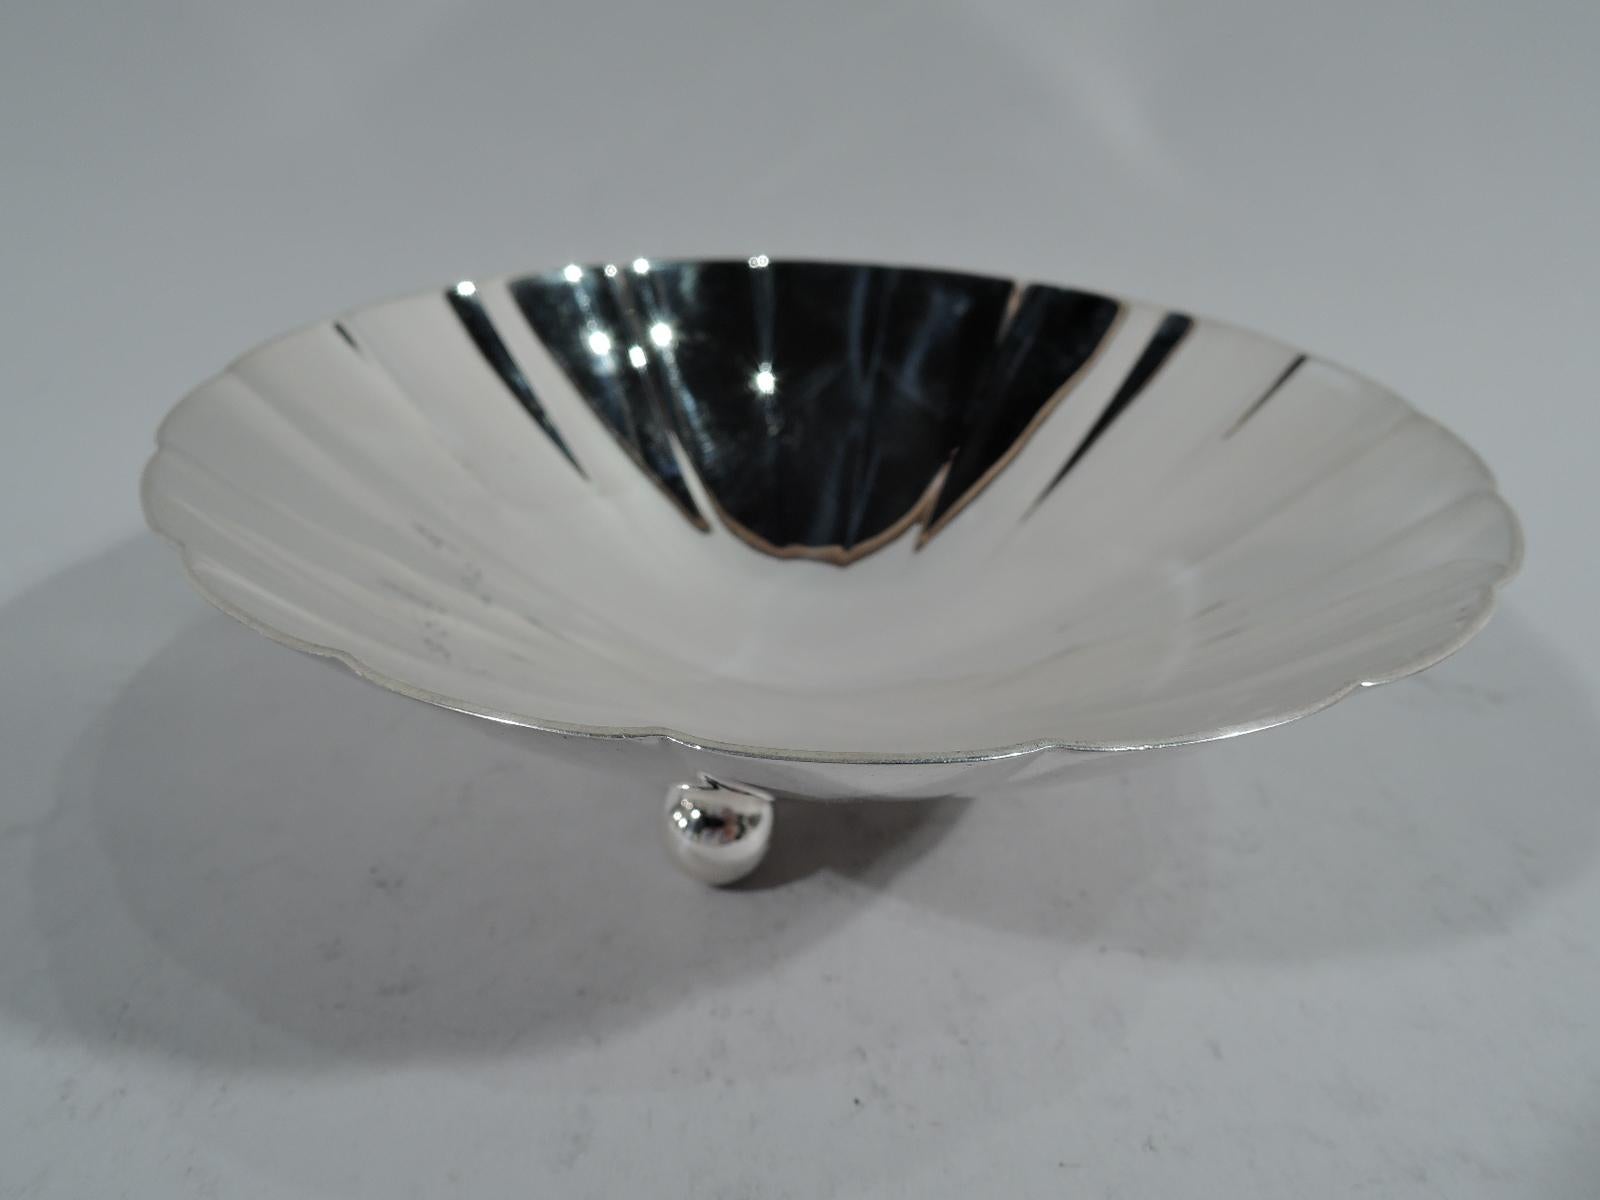 Midcentury Modern sterling silver bowl. Made by Tiffany & Co. in New York. Shallow cone with soft fluting and scalloped rim. Three ball supports. Hallmark includes pattern no. 22673 and director’s letter M (1947-56). Weight: 7.5 troy ounces.